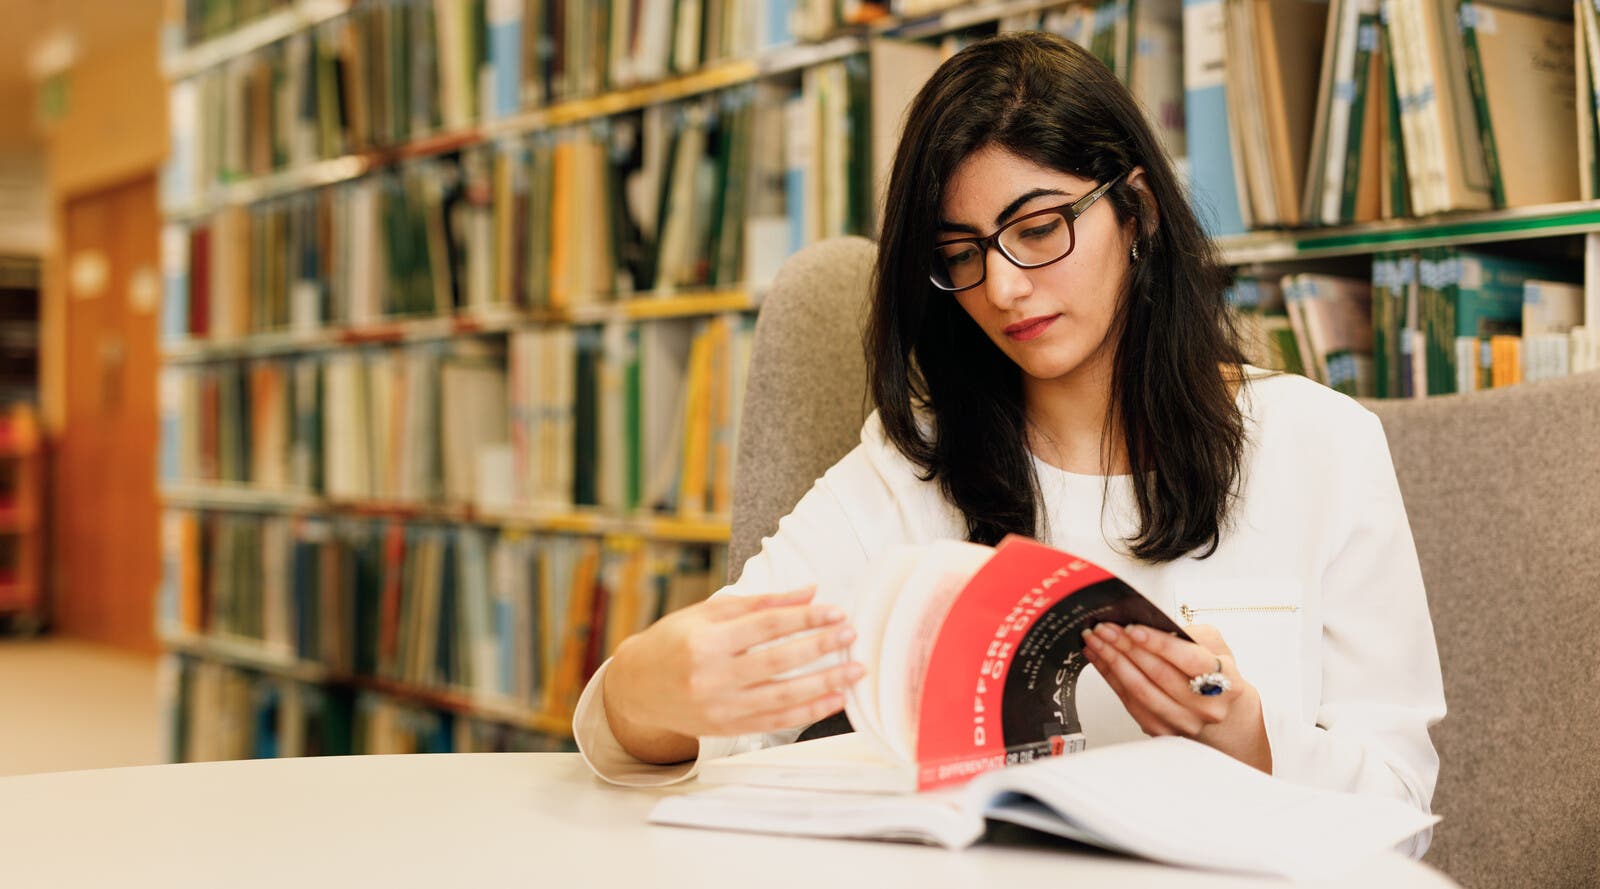 Student flipping through book in library